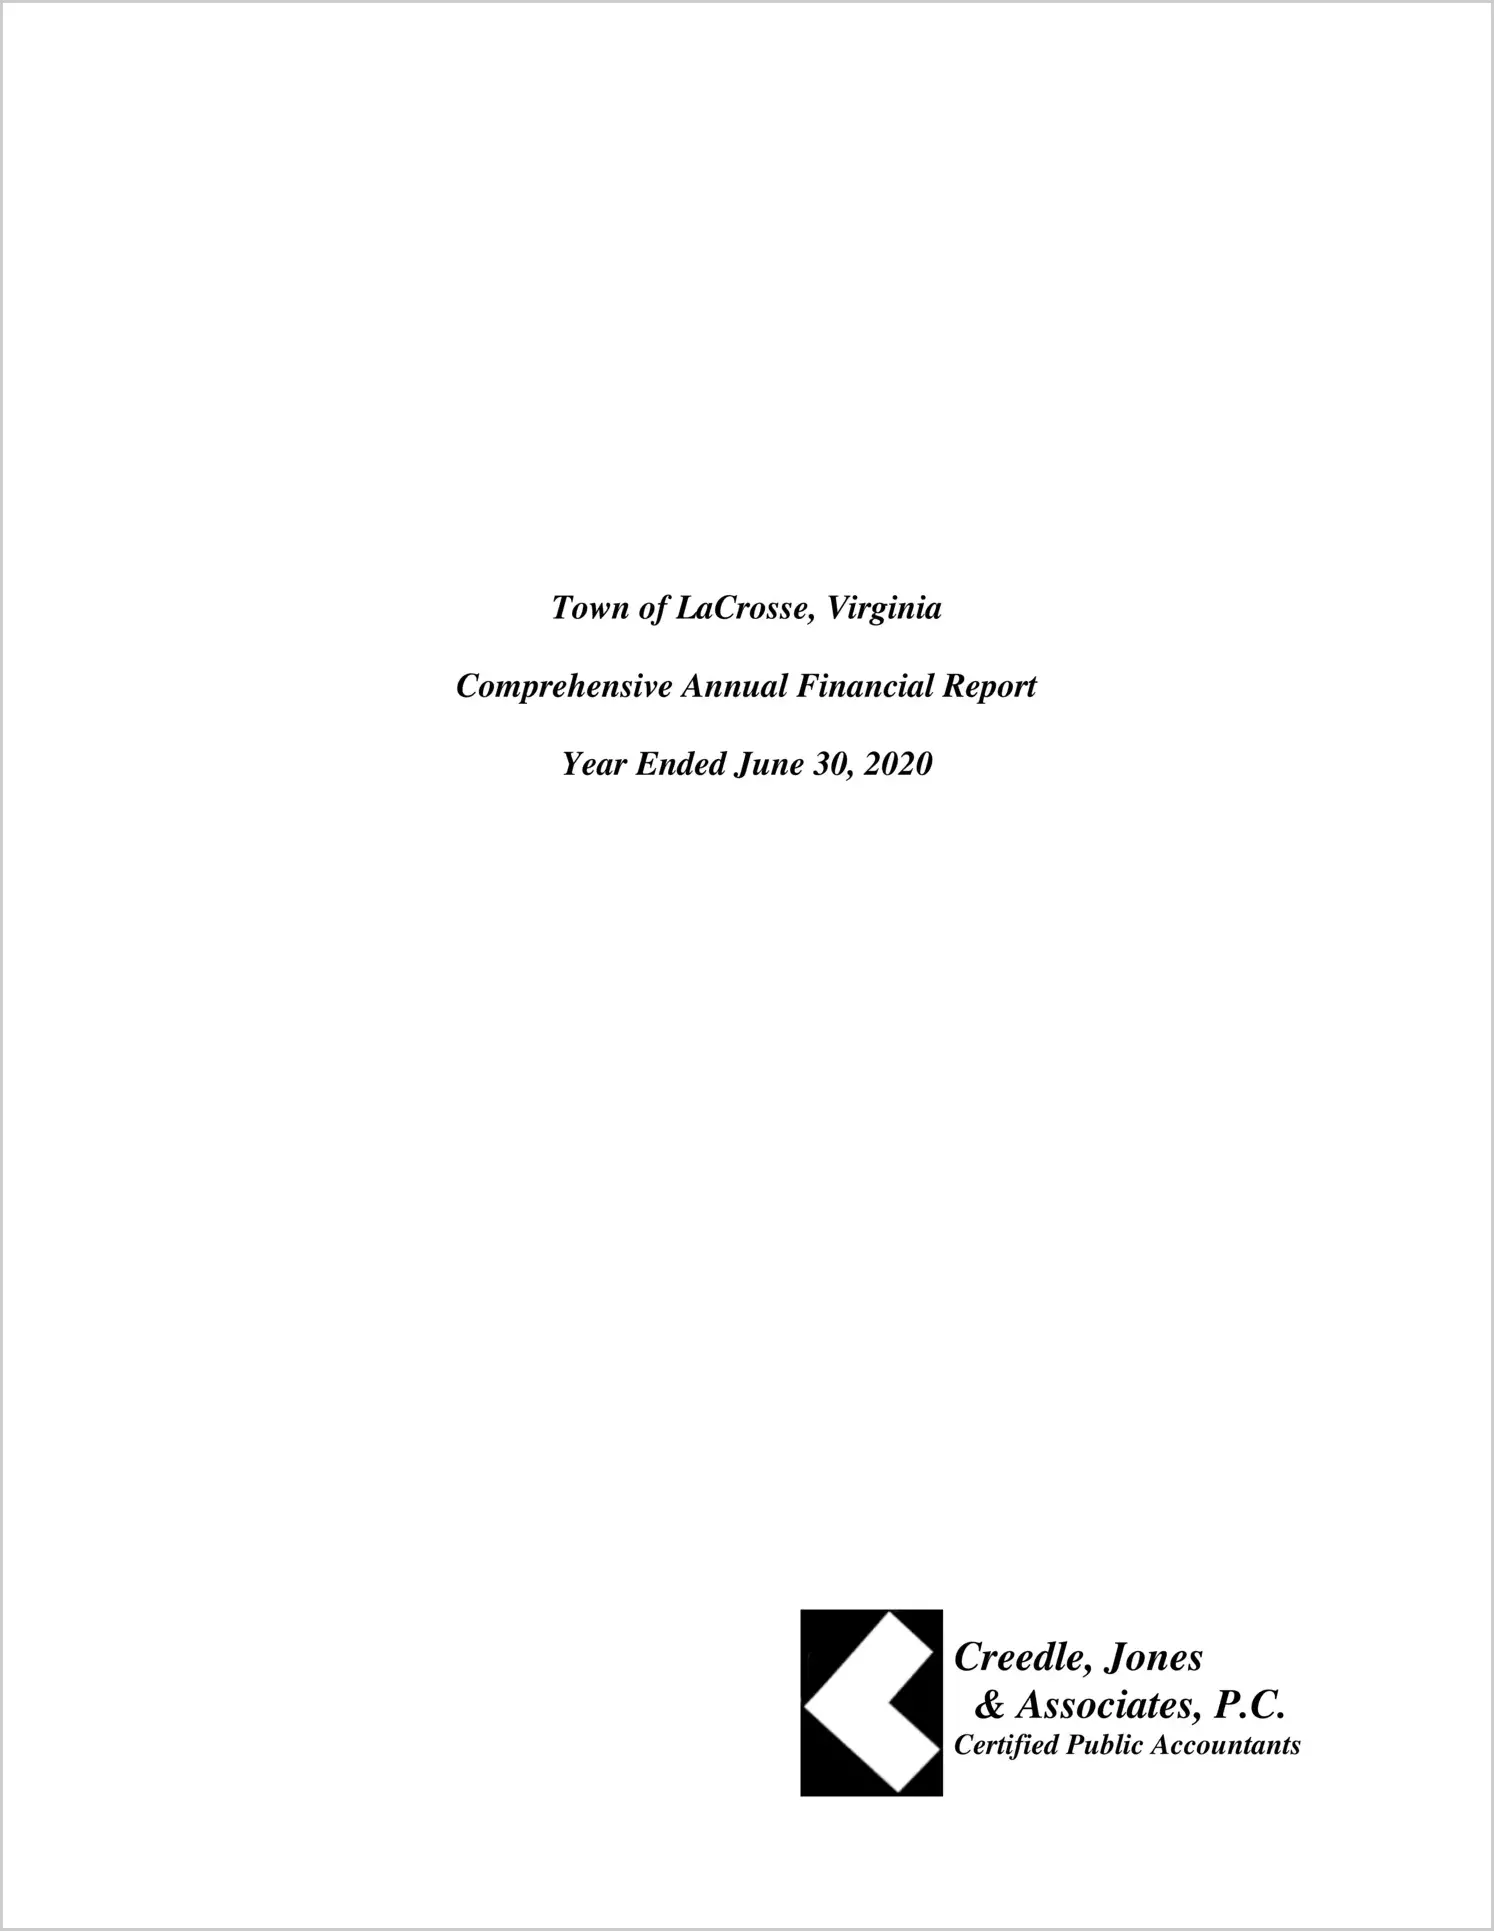 2020 Annual Financial Report-Small Town for Town of La Crosse